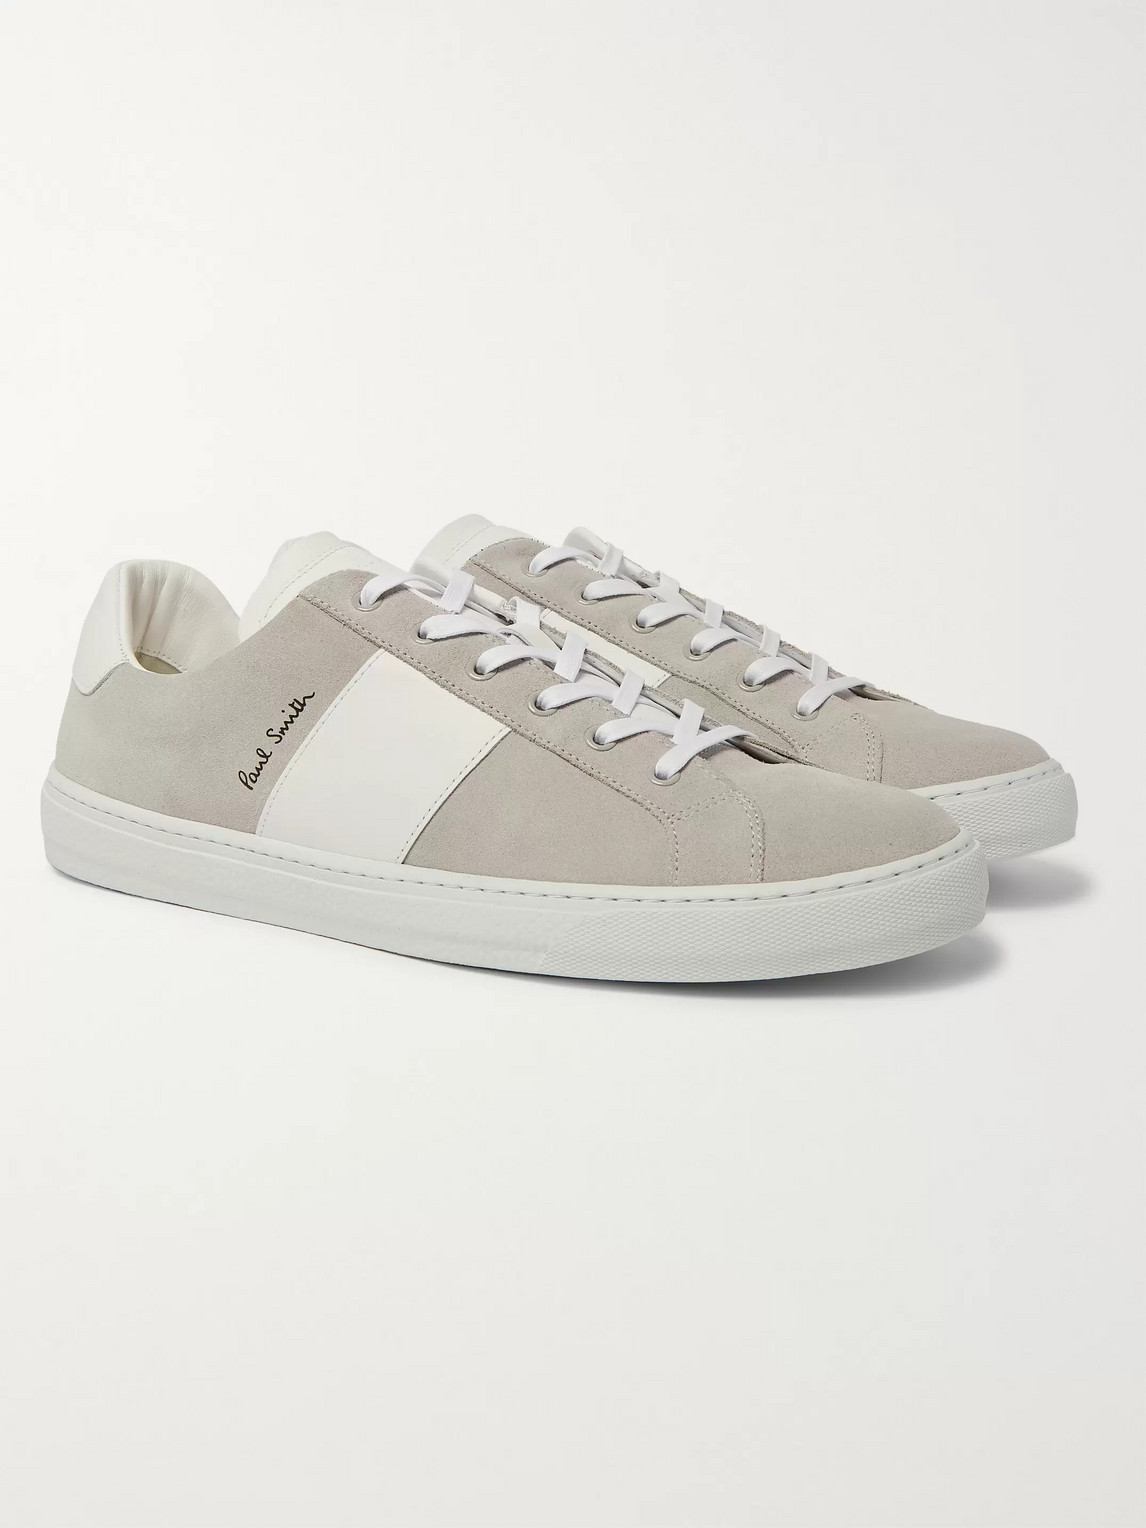 PAUL SMITH HANSEN LEATHER-TRIMMED SUEDE SNEAKERS